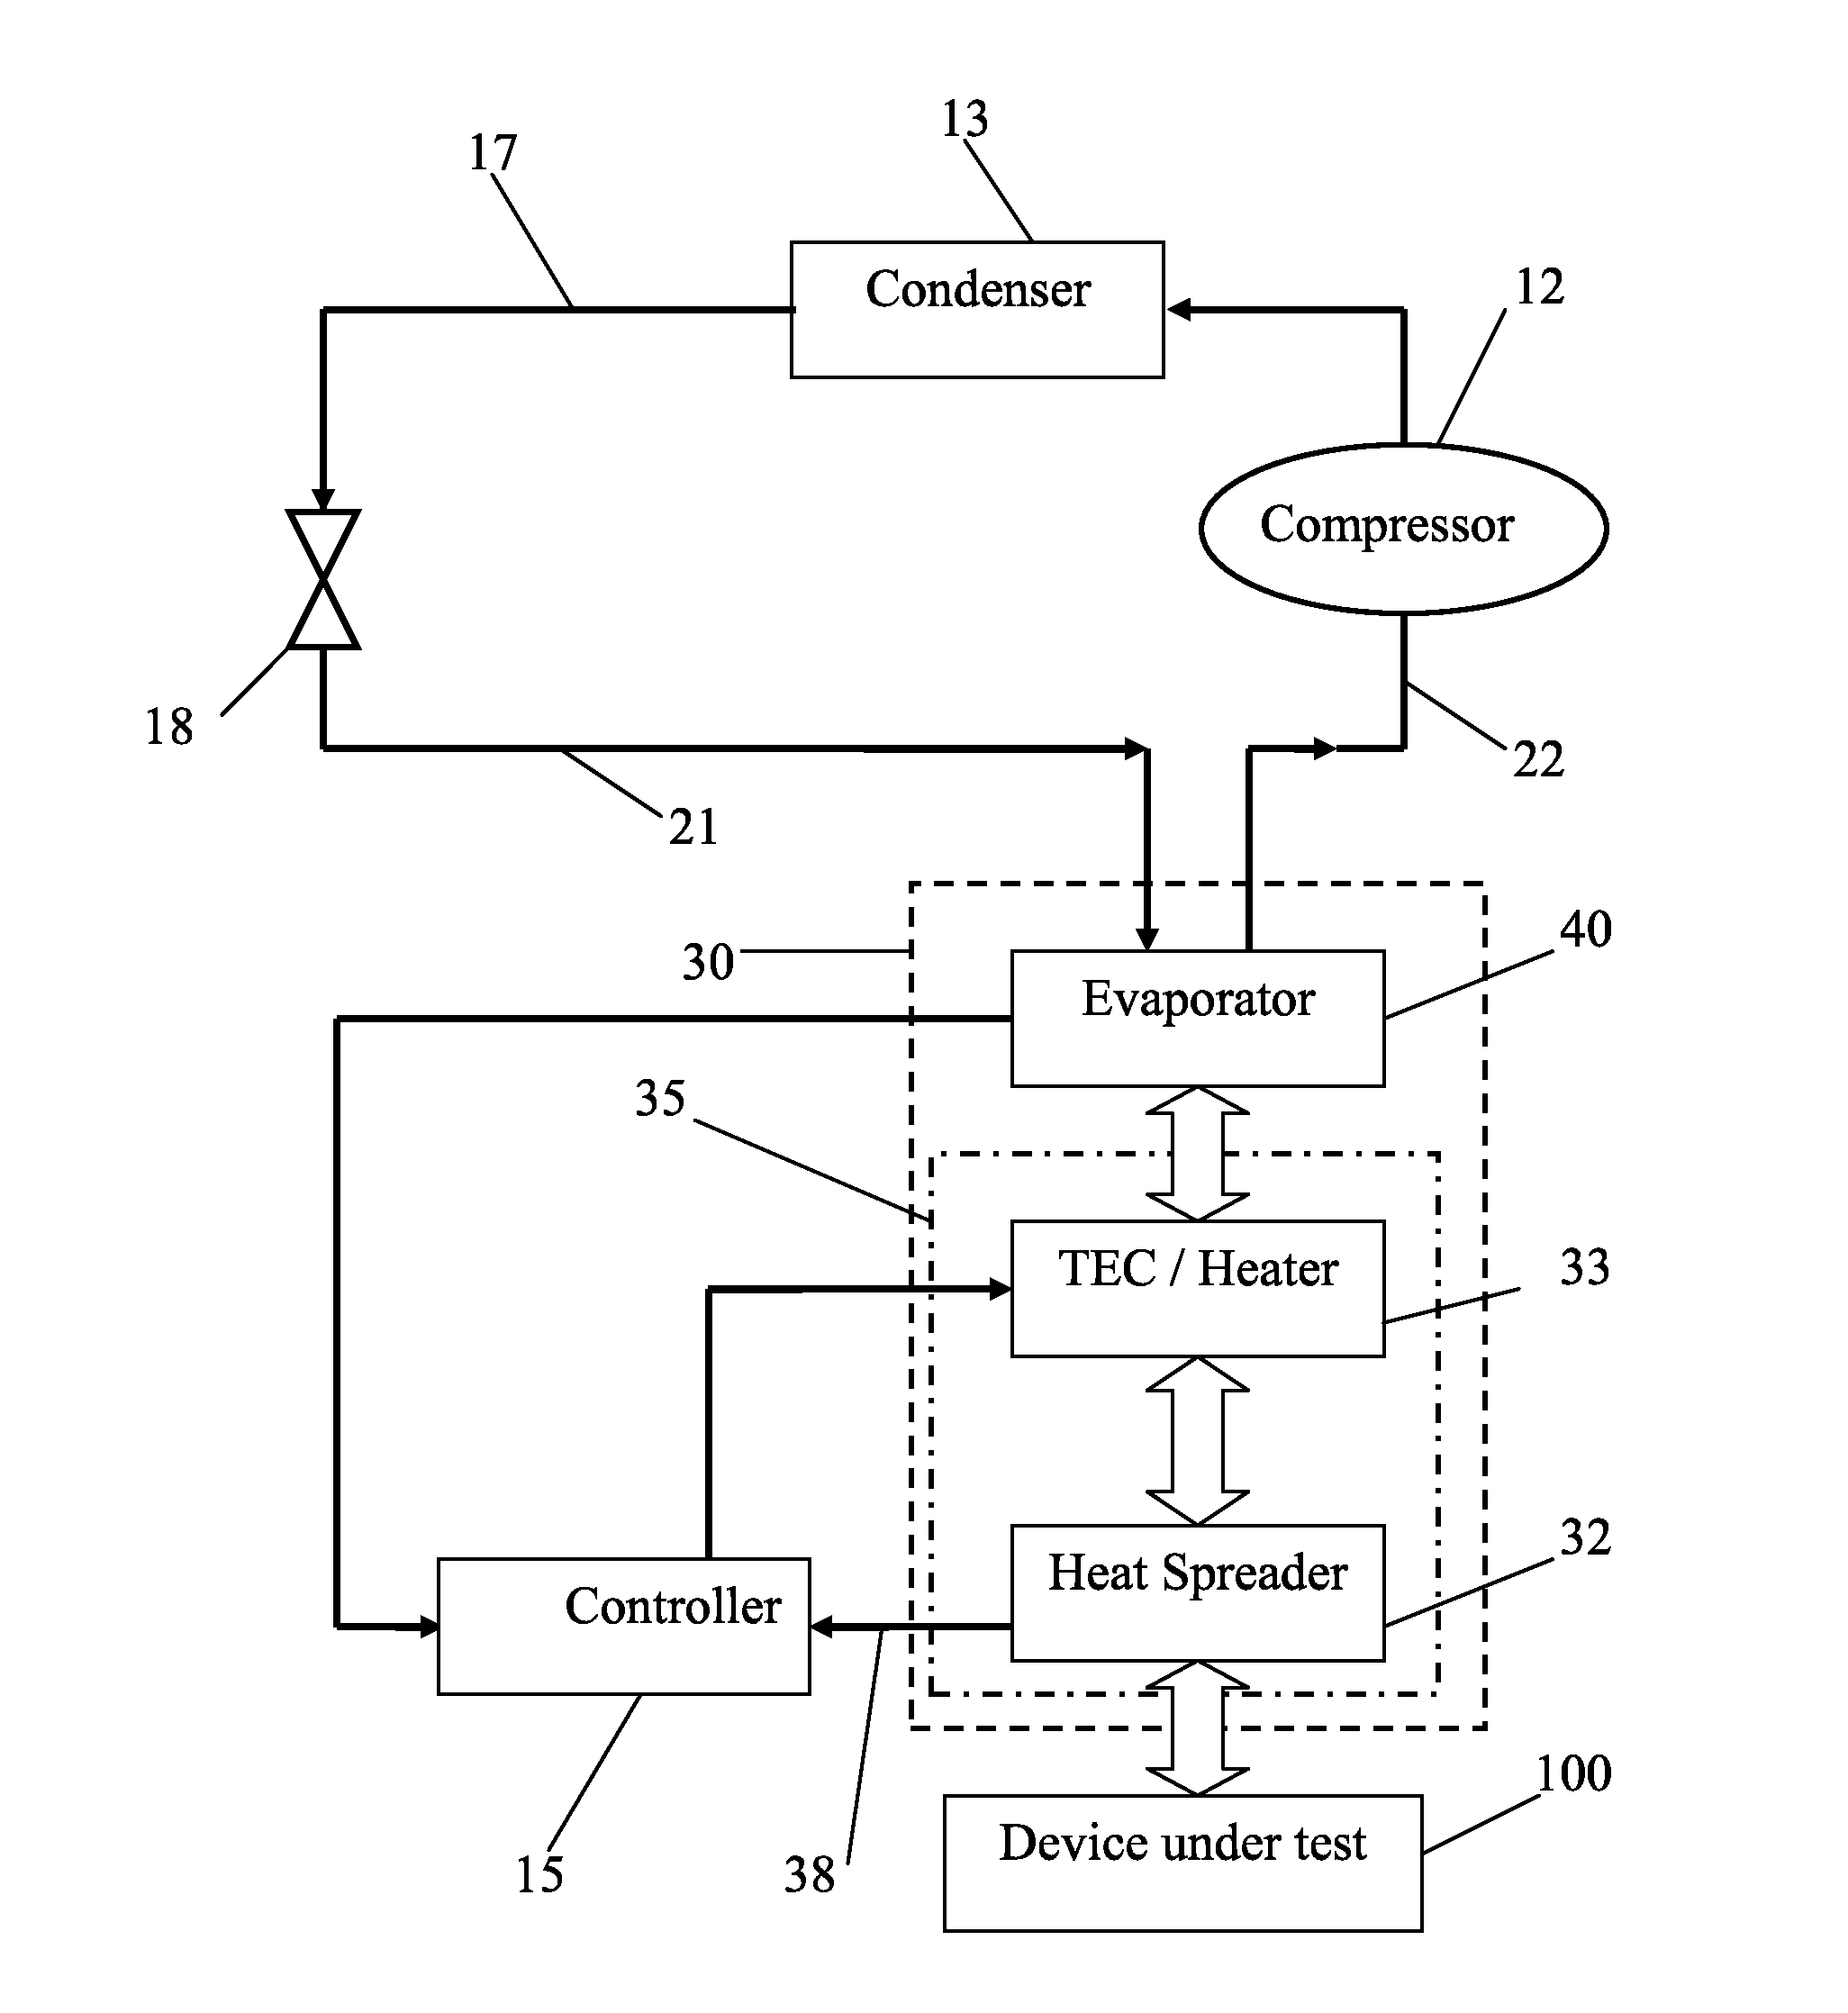 Efficient temperature forcing of semiconductor devices under test